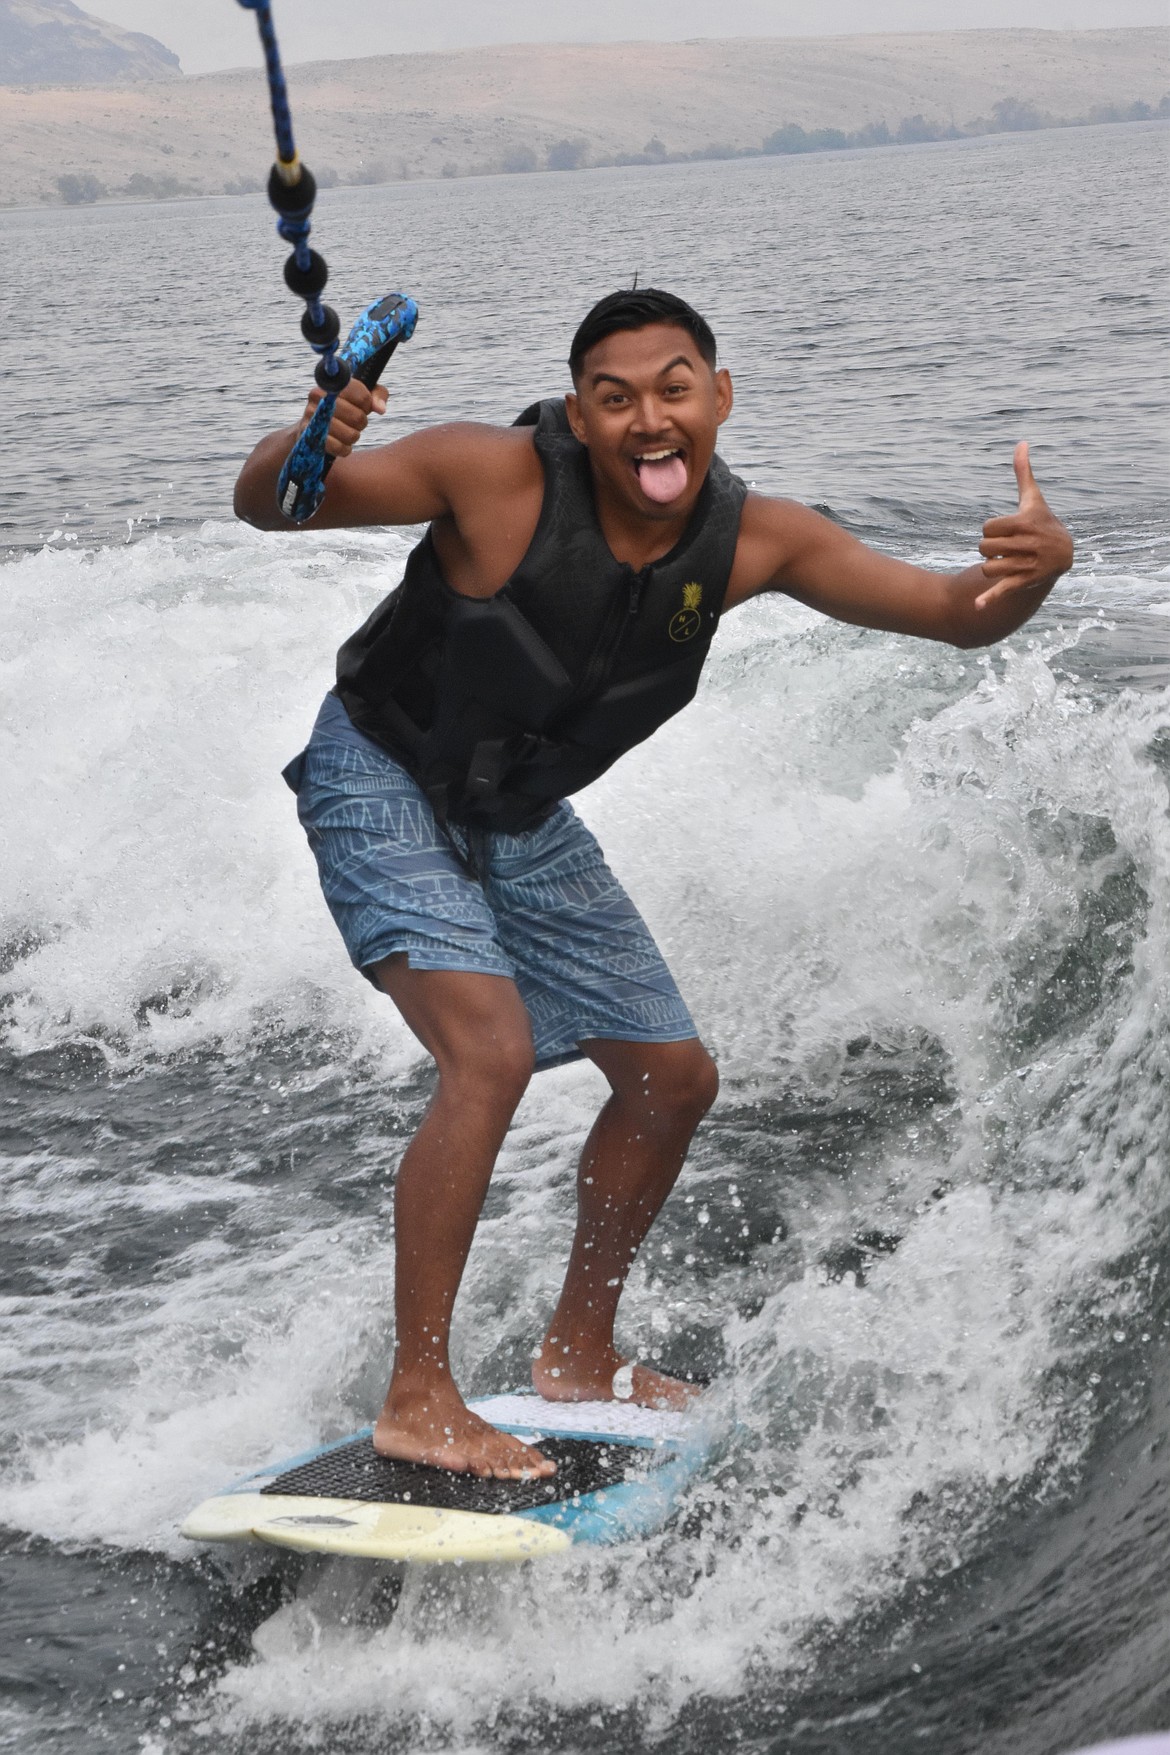 WFW participants had fun surfing the waters of the Columbia over the weekend.